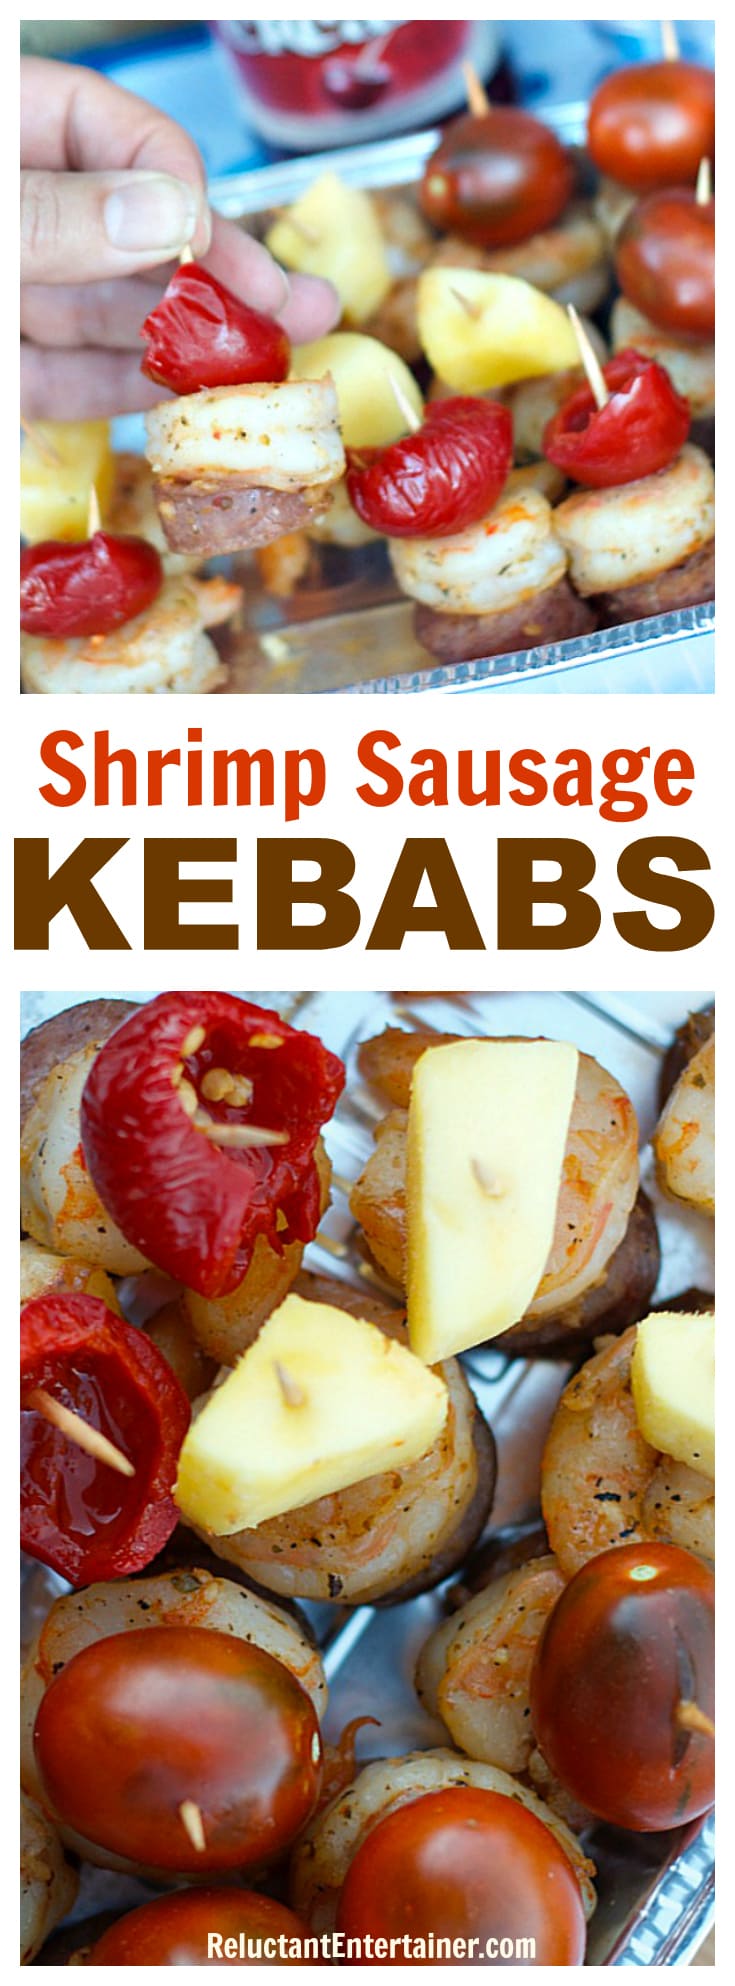 Shrimp Sausage Kebabs for tailgating or game day parties, picnics, or easy entertaining!